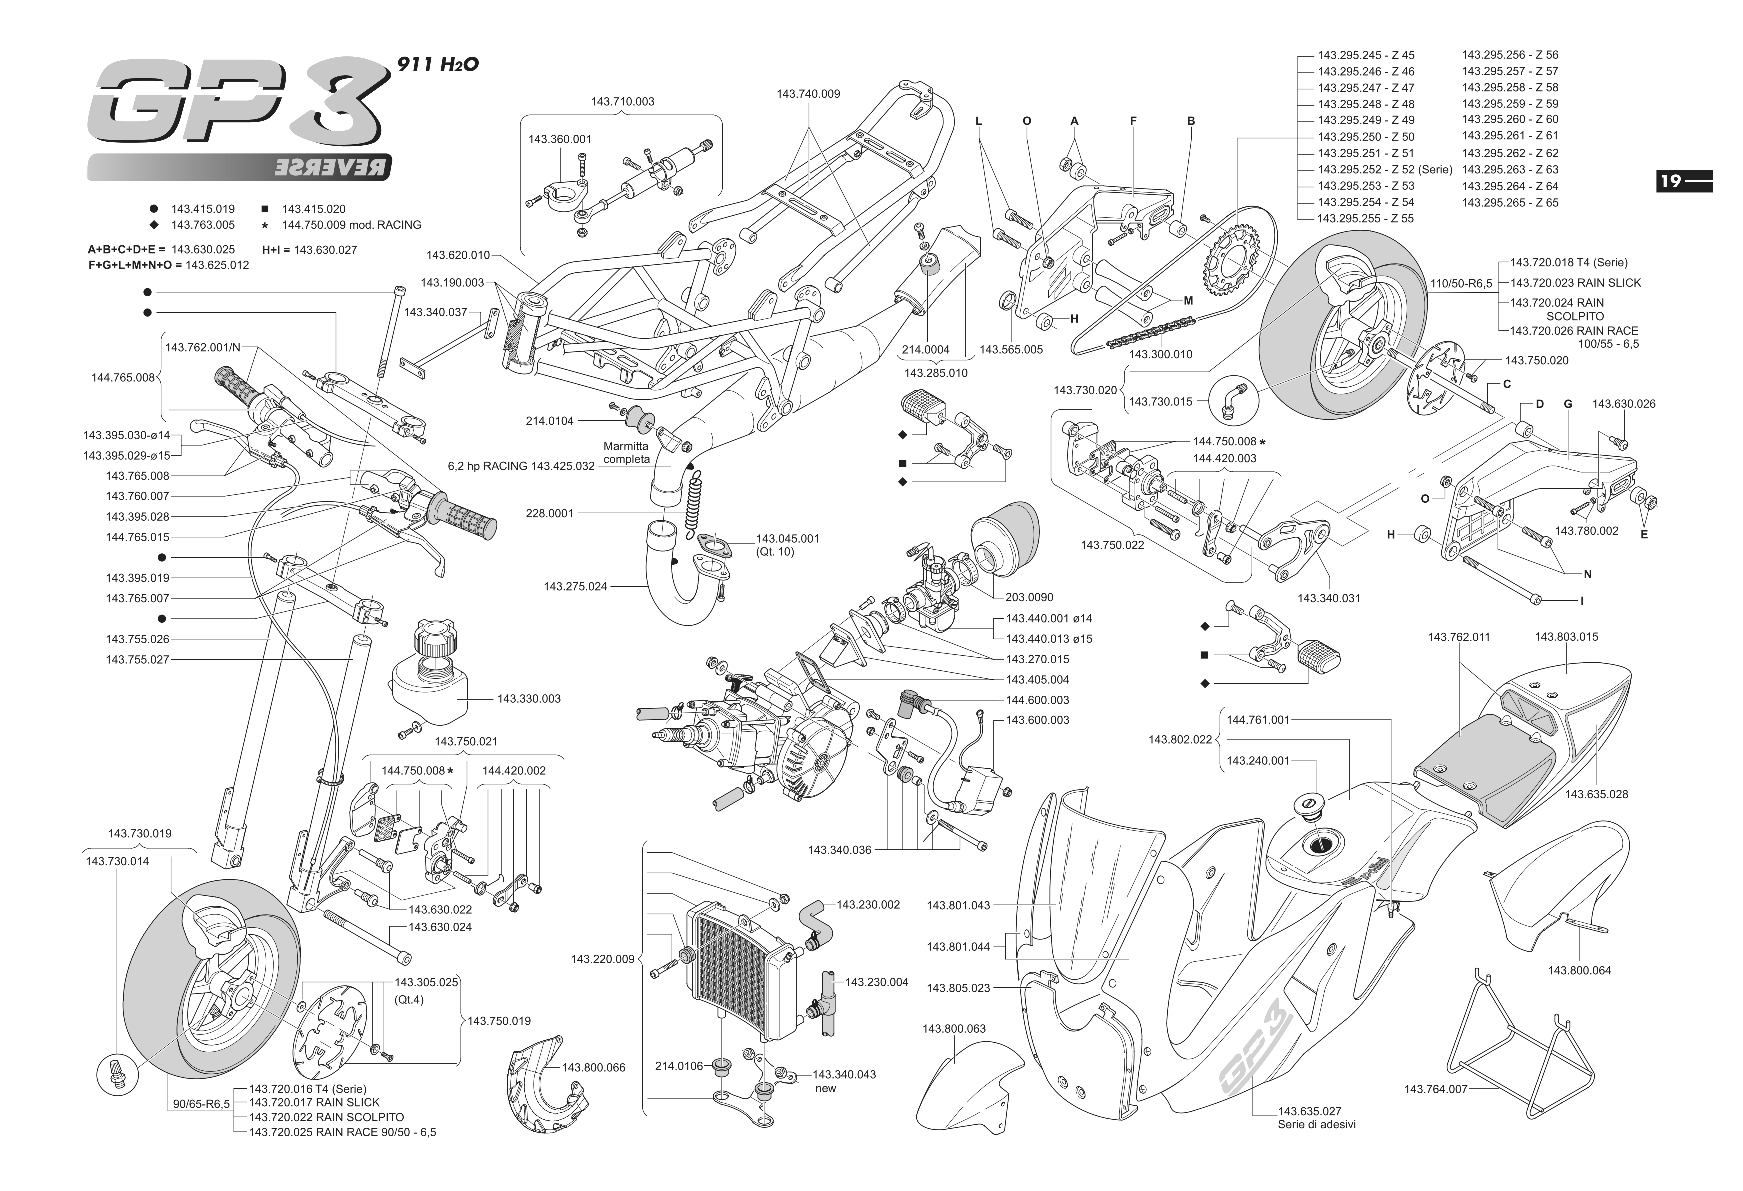 Exploded view Chassis - Motoronderdelen